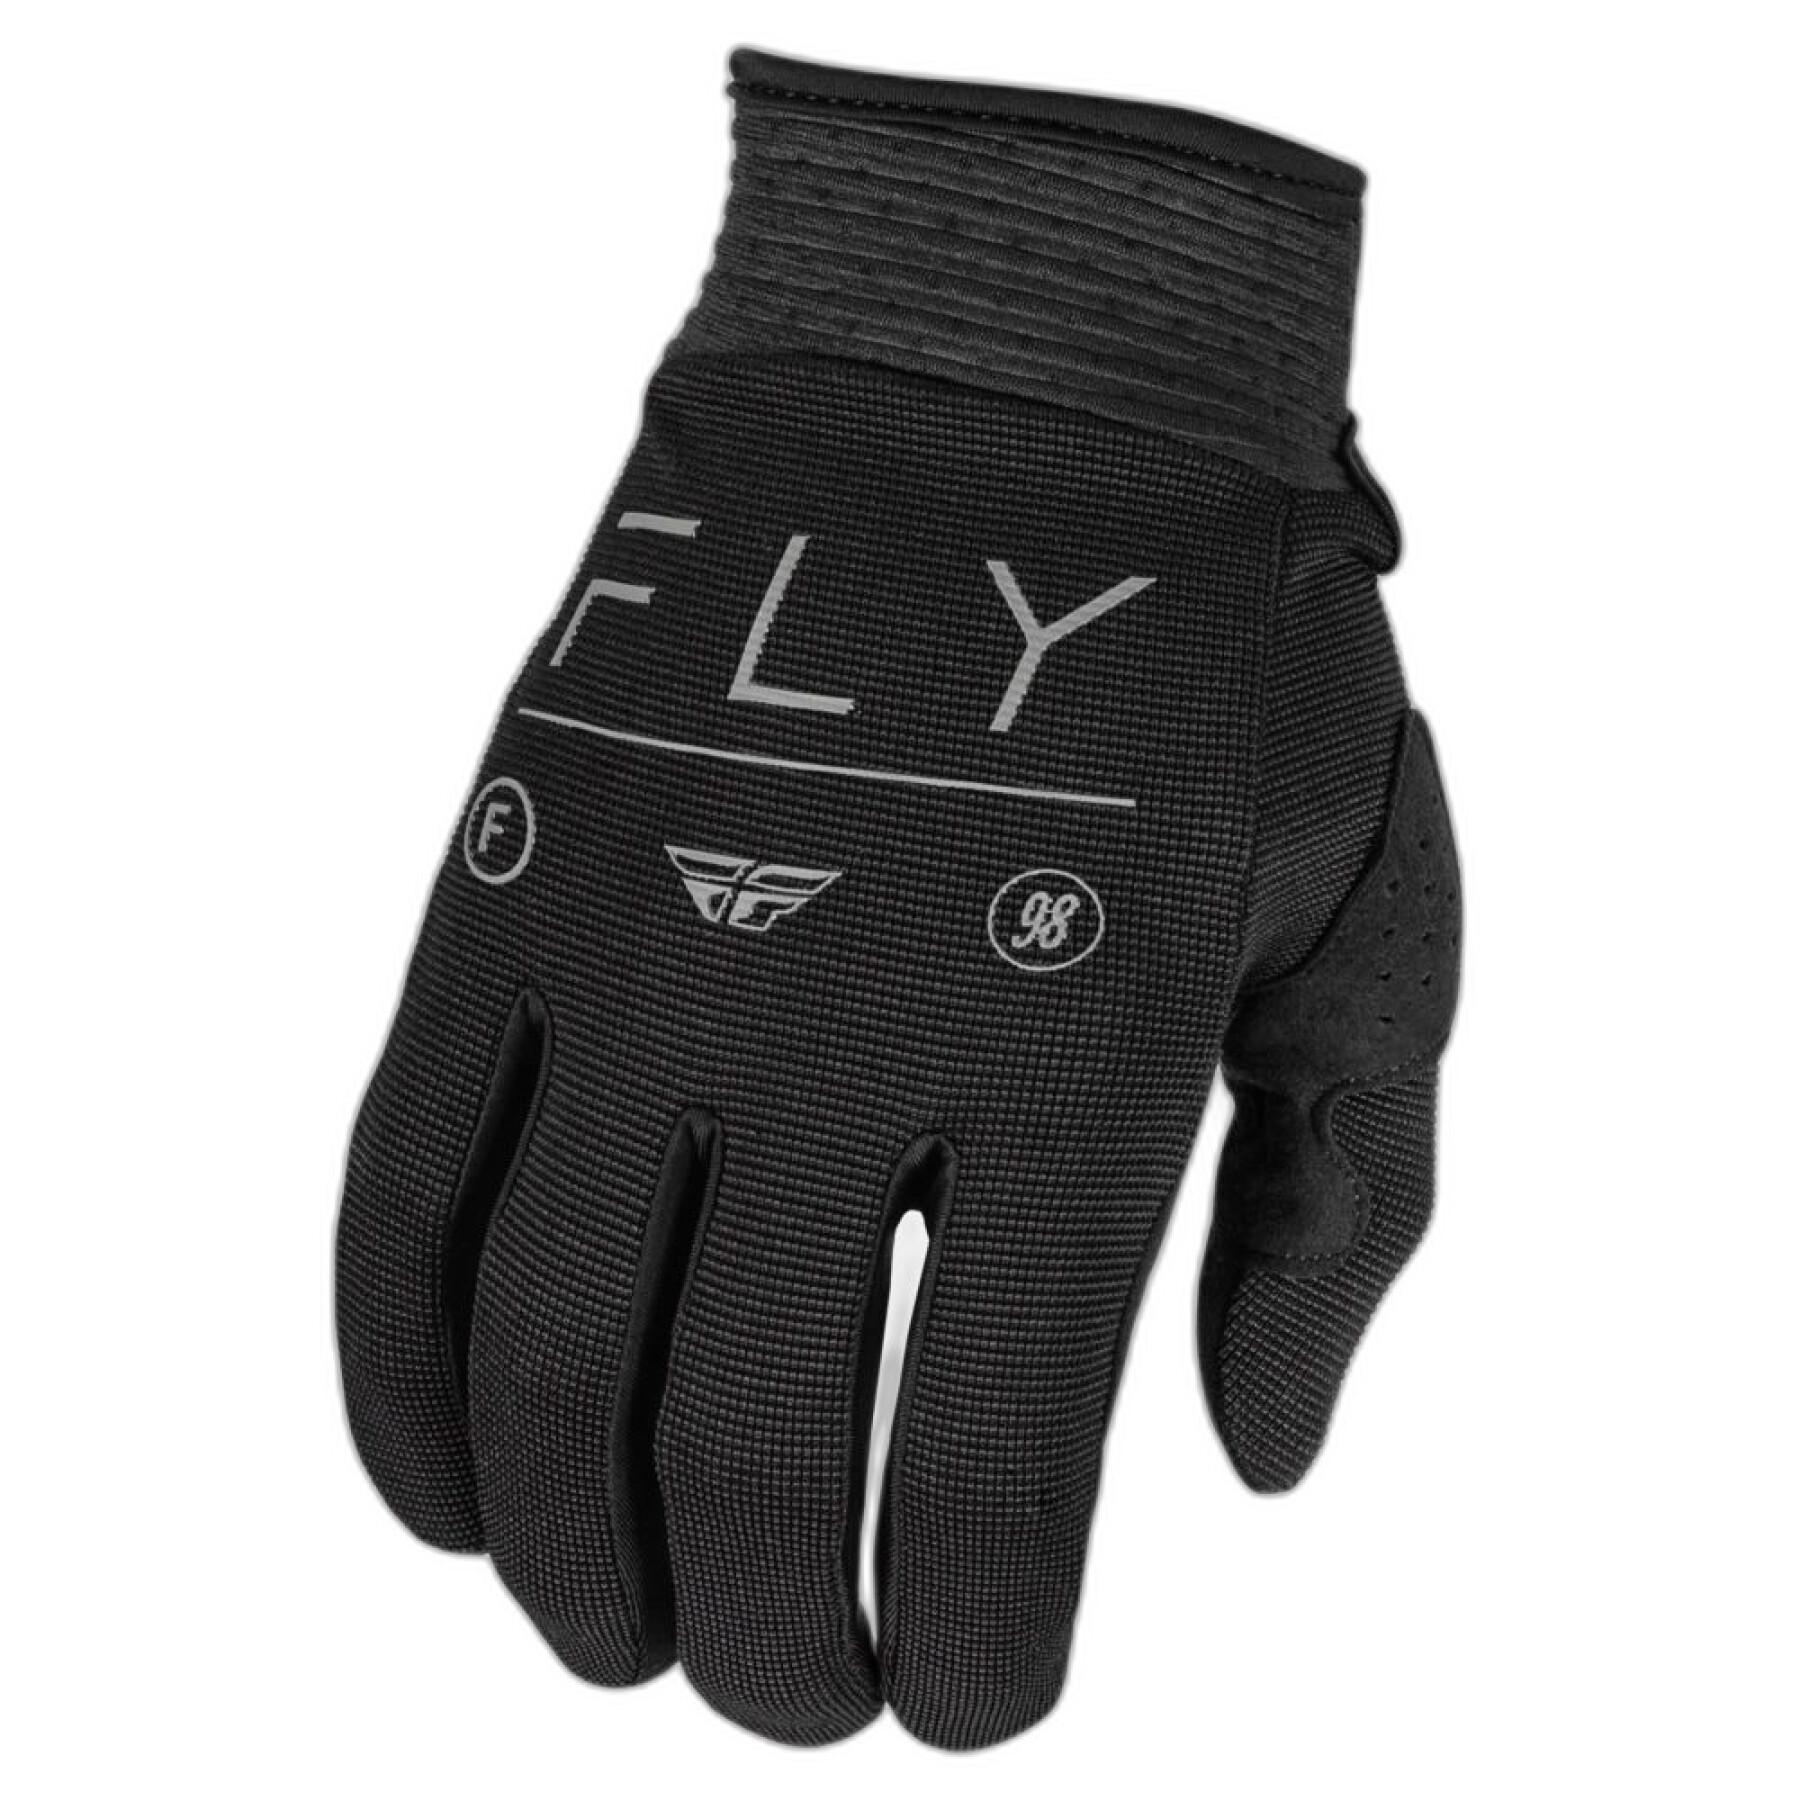 Motorcycle cross gloves Fly Racing F-16